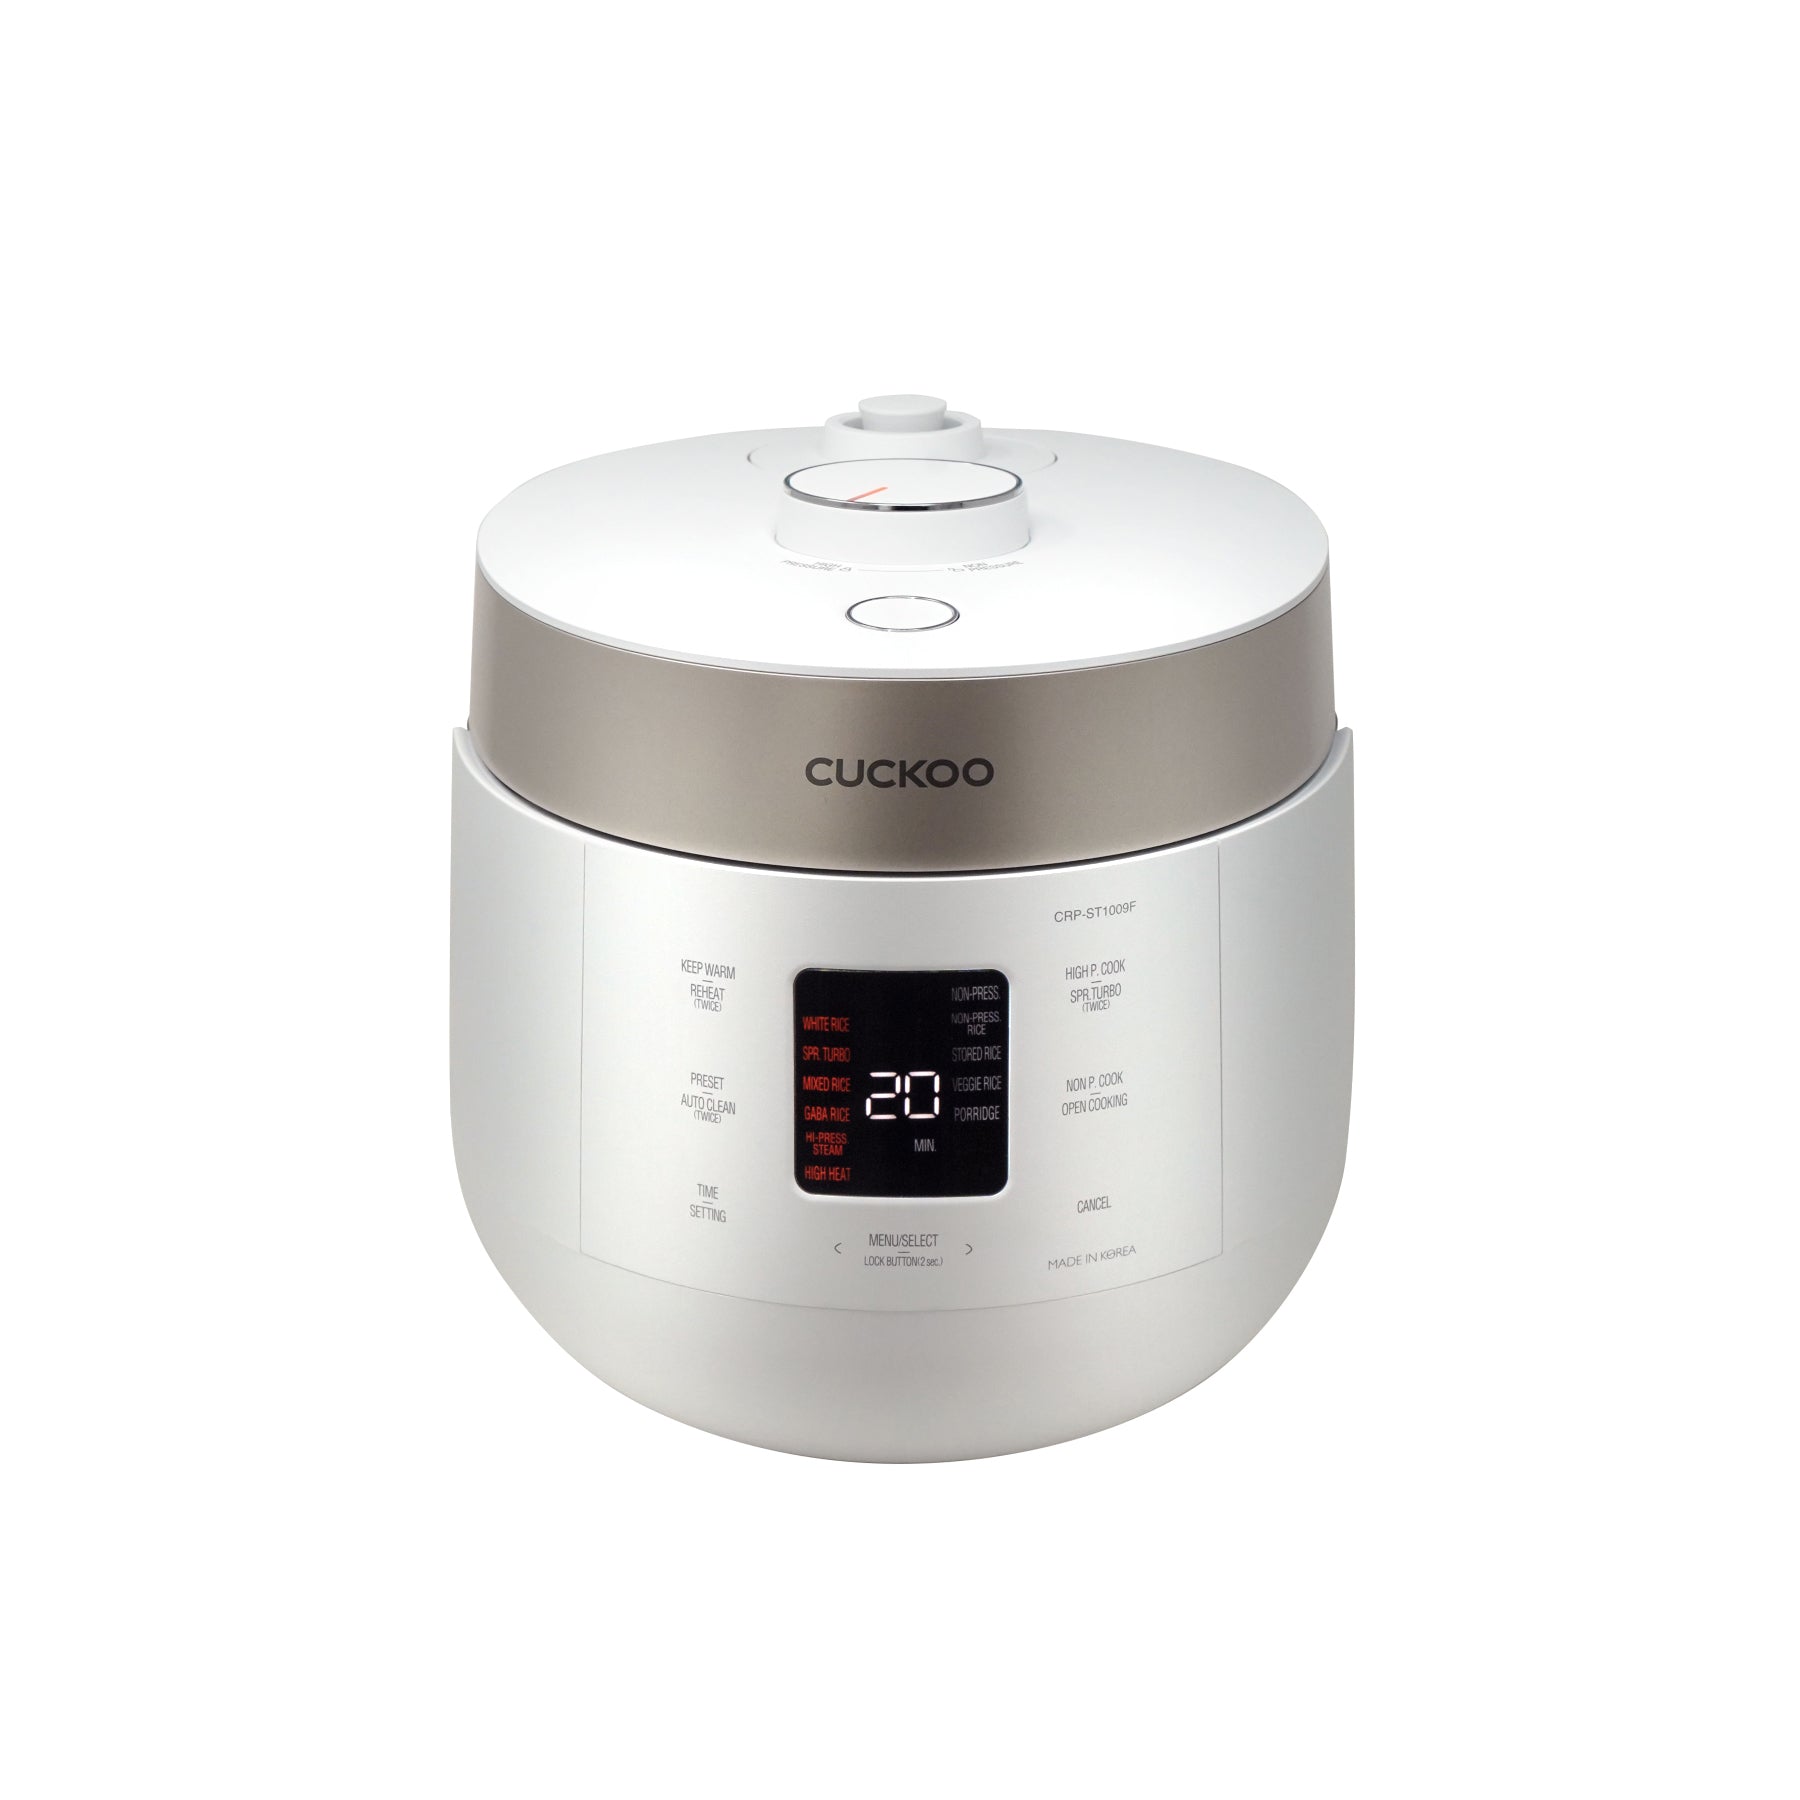  CRP-P1009SW 120V 10 Cup Electric Pressure Rice Cooker,  White